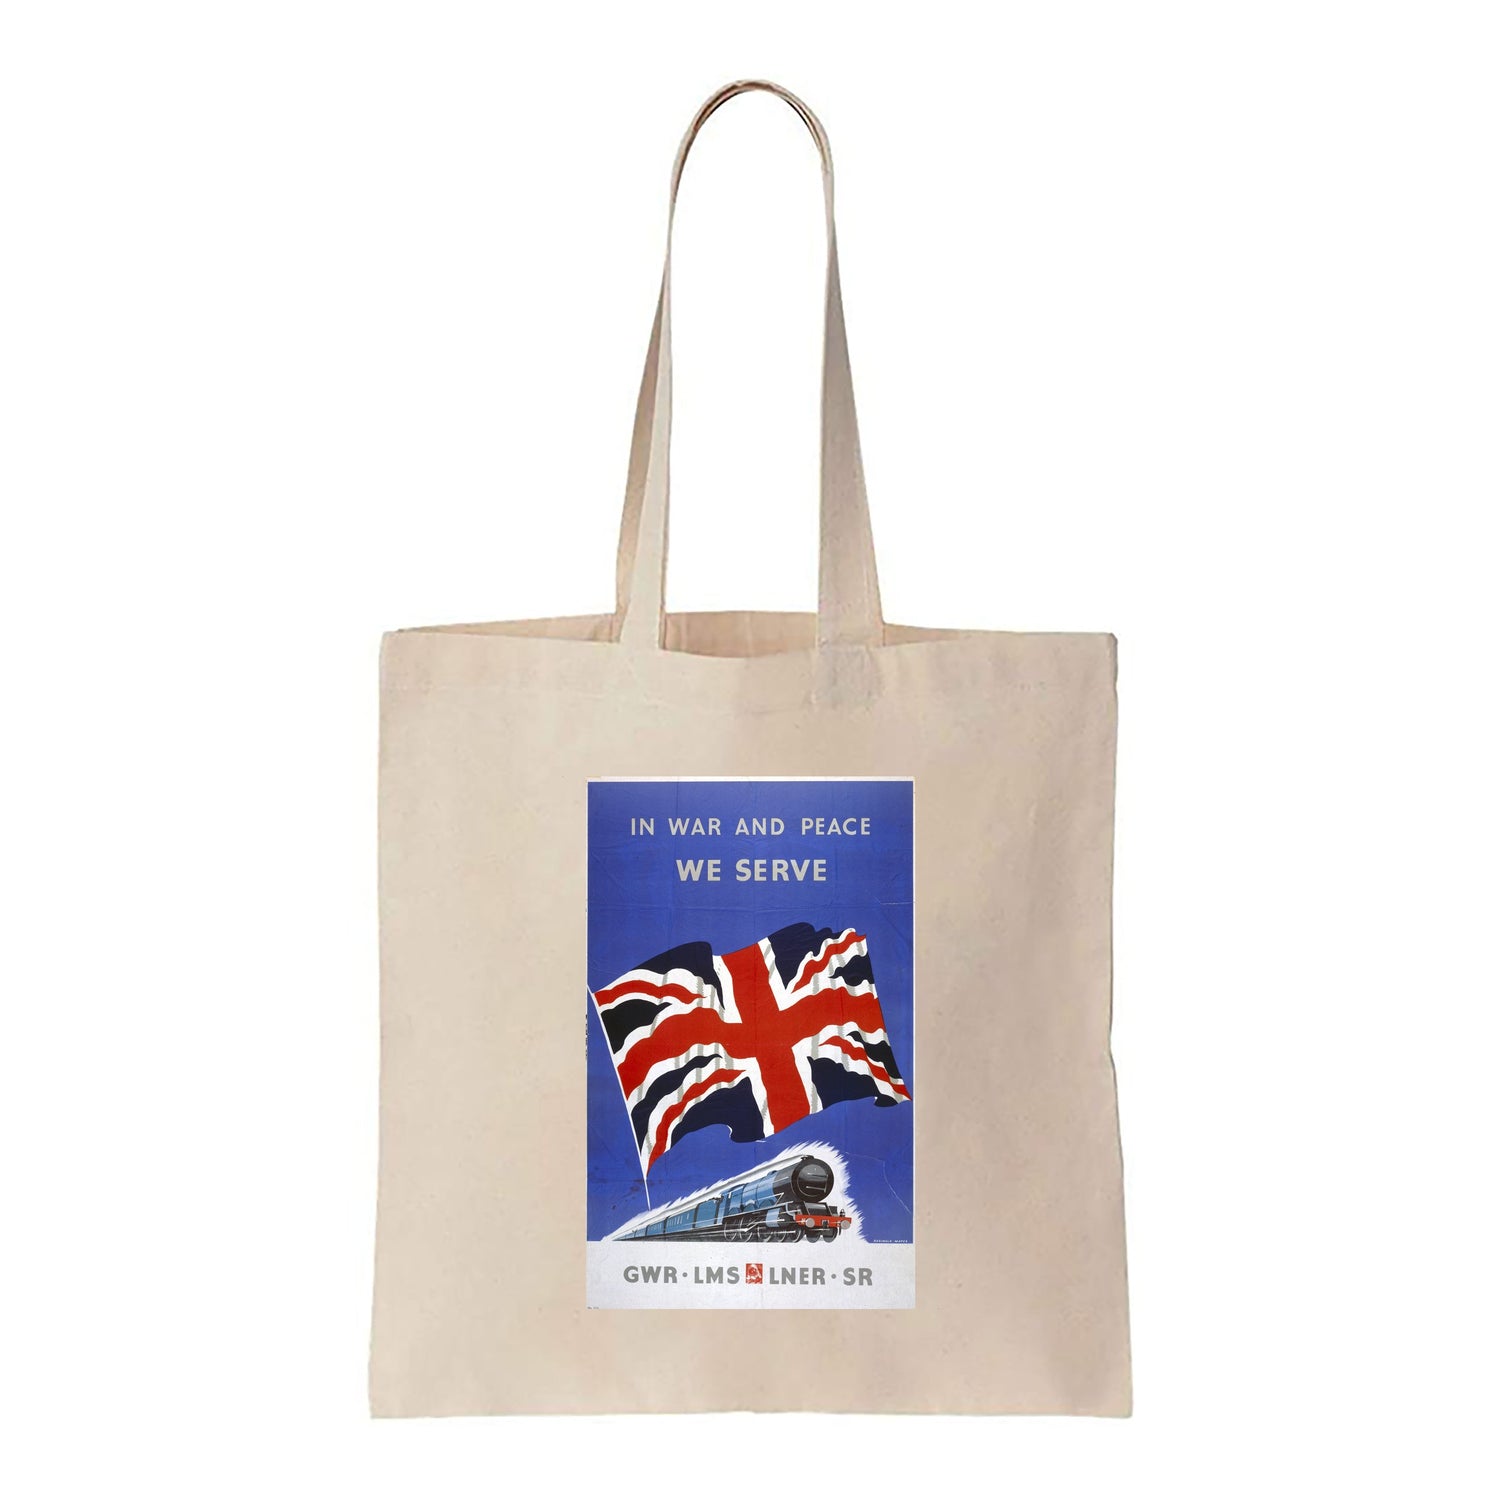 In War And Peace We Serve - Canvas Tote Bag